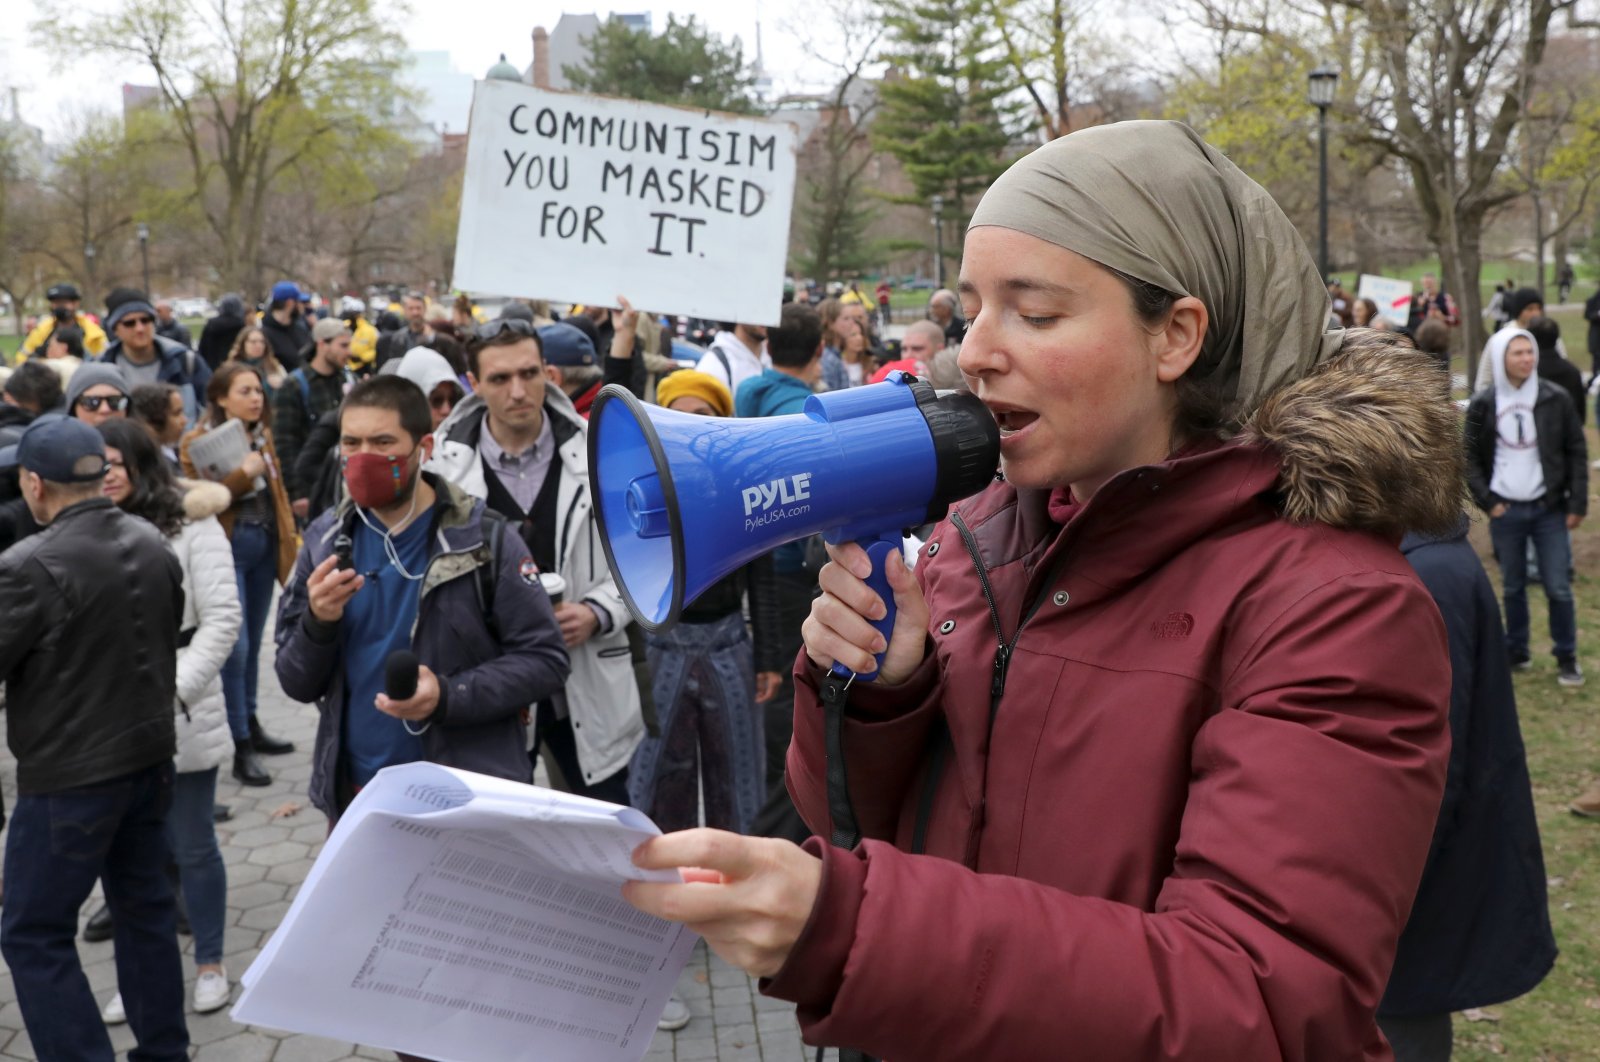 A demonstrator speaks through a megaphone during a protest against new coronavirus disease (COVD-19) restrictions, in Toronto, Canada, April 17, 2021. (REUTERS Photo)